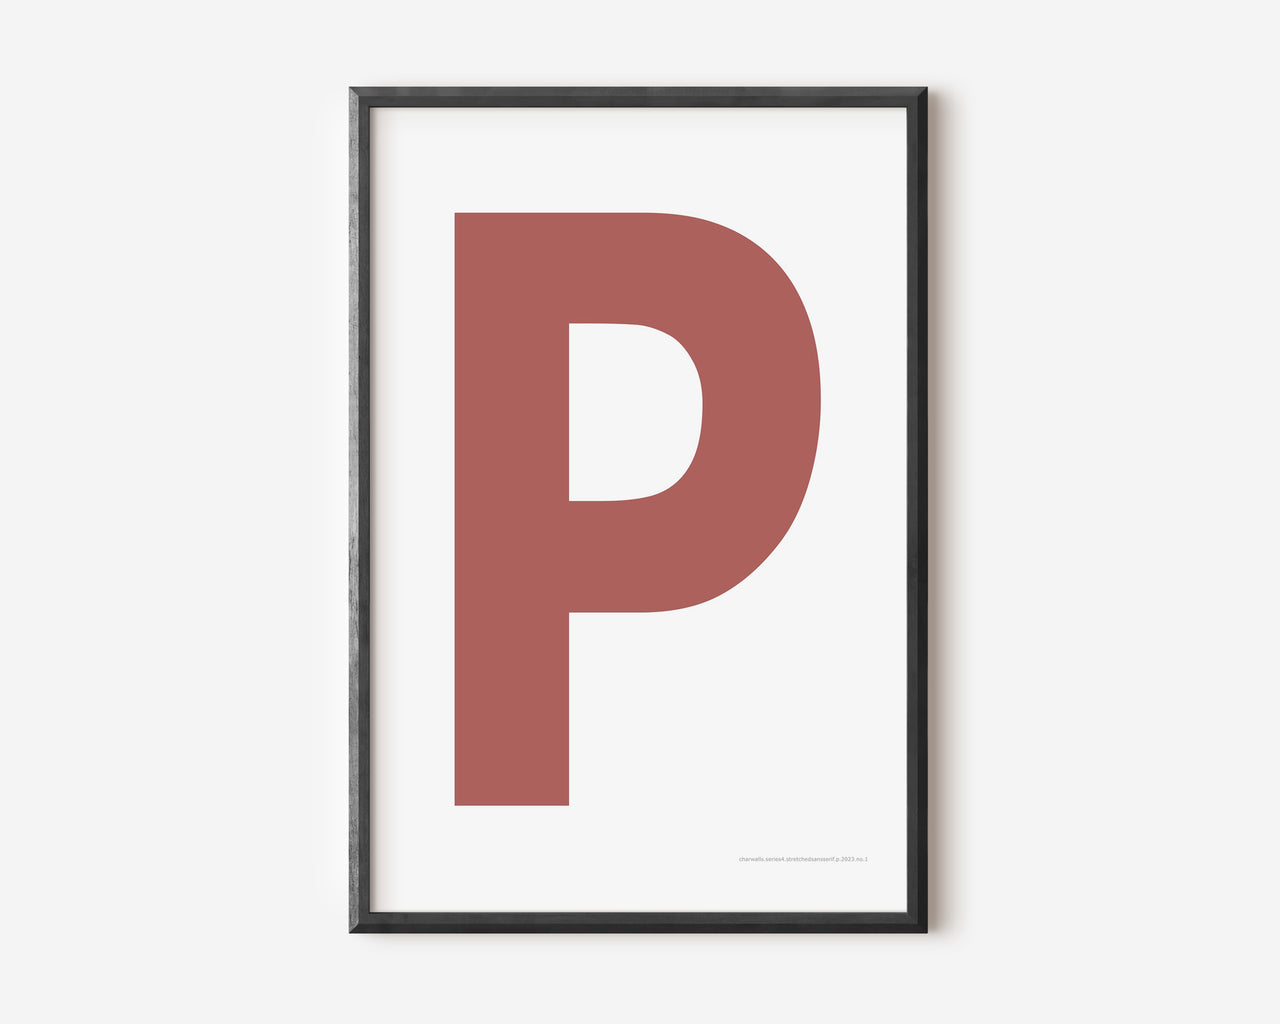 Modern art print with an uppercase Nantucket red letter P on a white background.